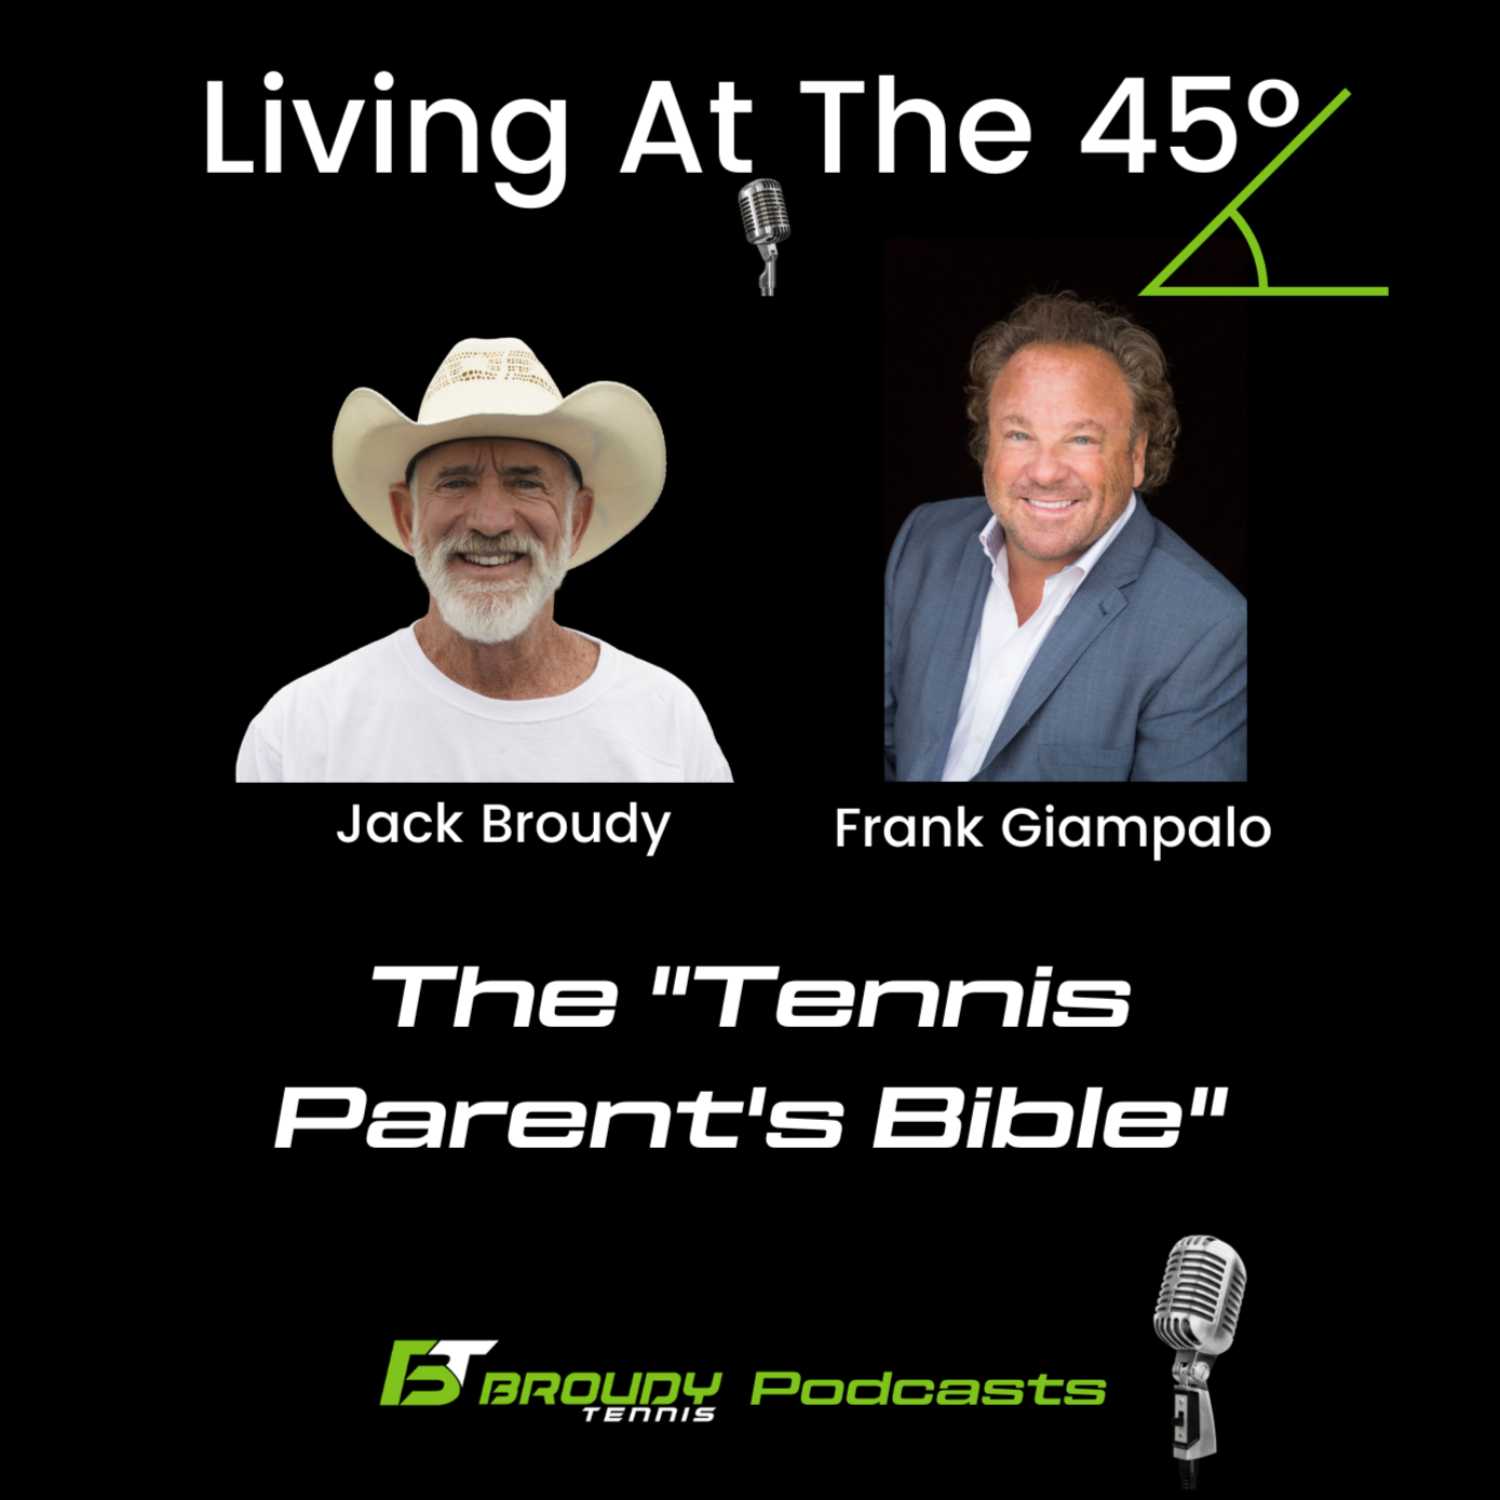 Living At The 45º with Frank Giampalo: "The Tennis Parent Bible"